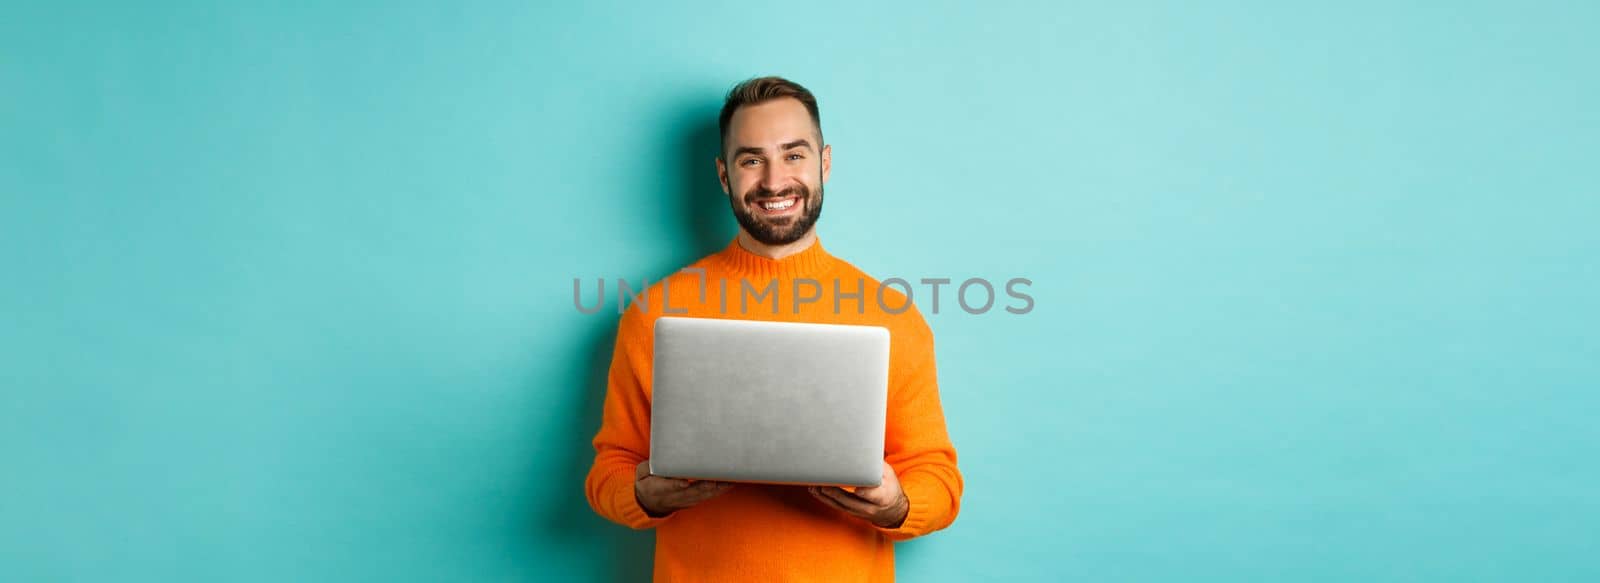 Handsome freelancer working on laptop and smiling, standing in orange sweater over light blue background.